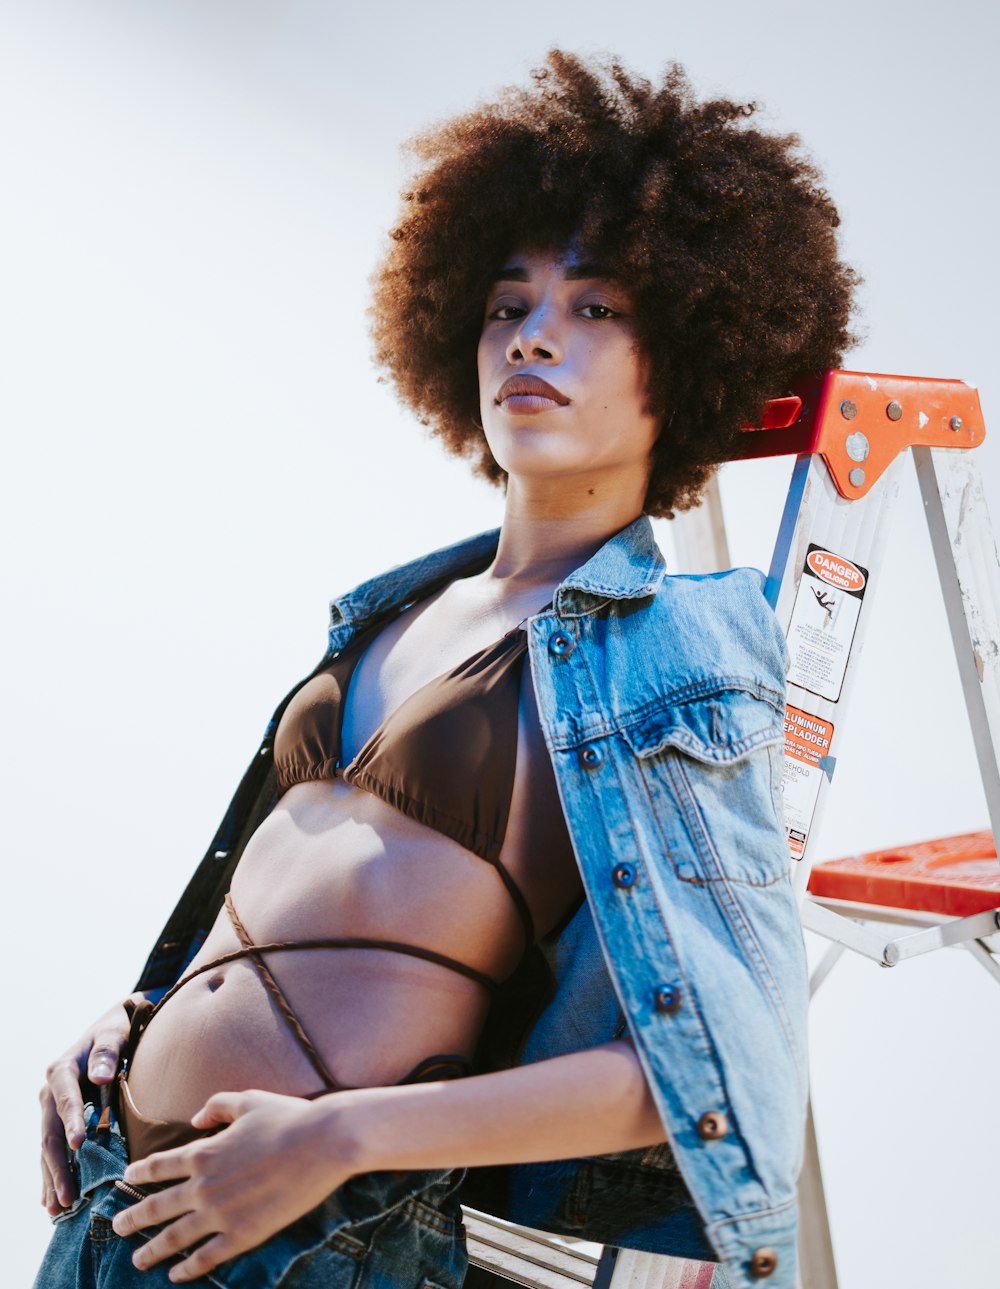 a woman with an afro standing next to a ladder